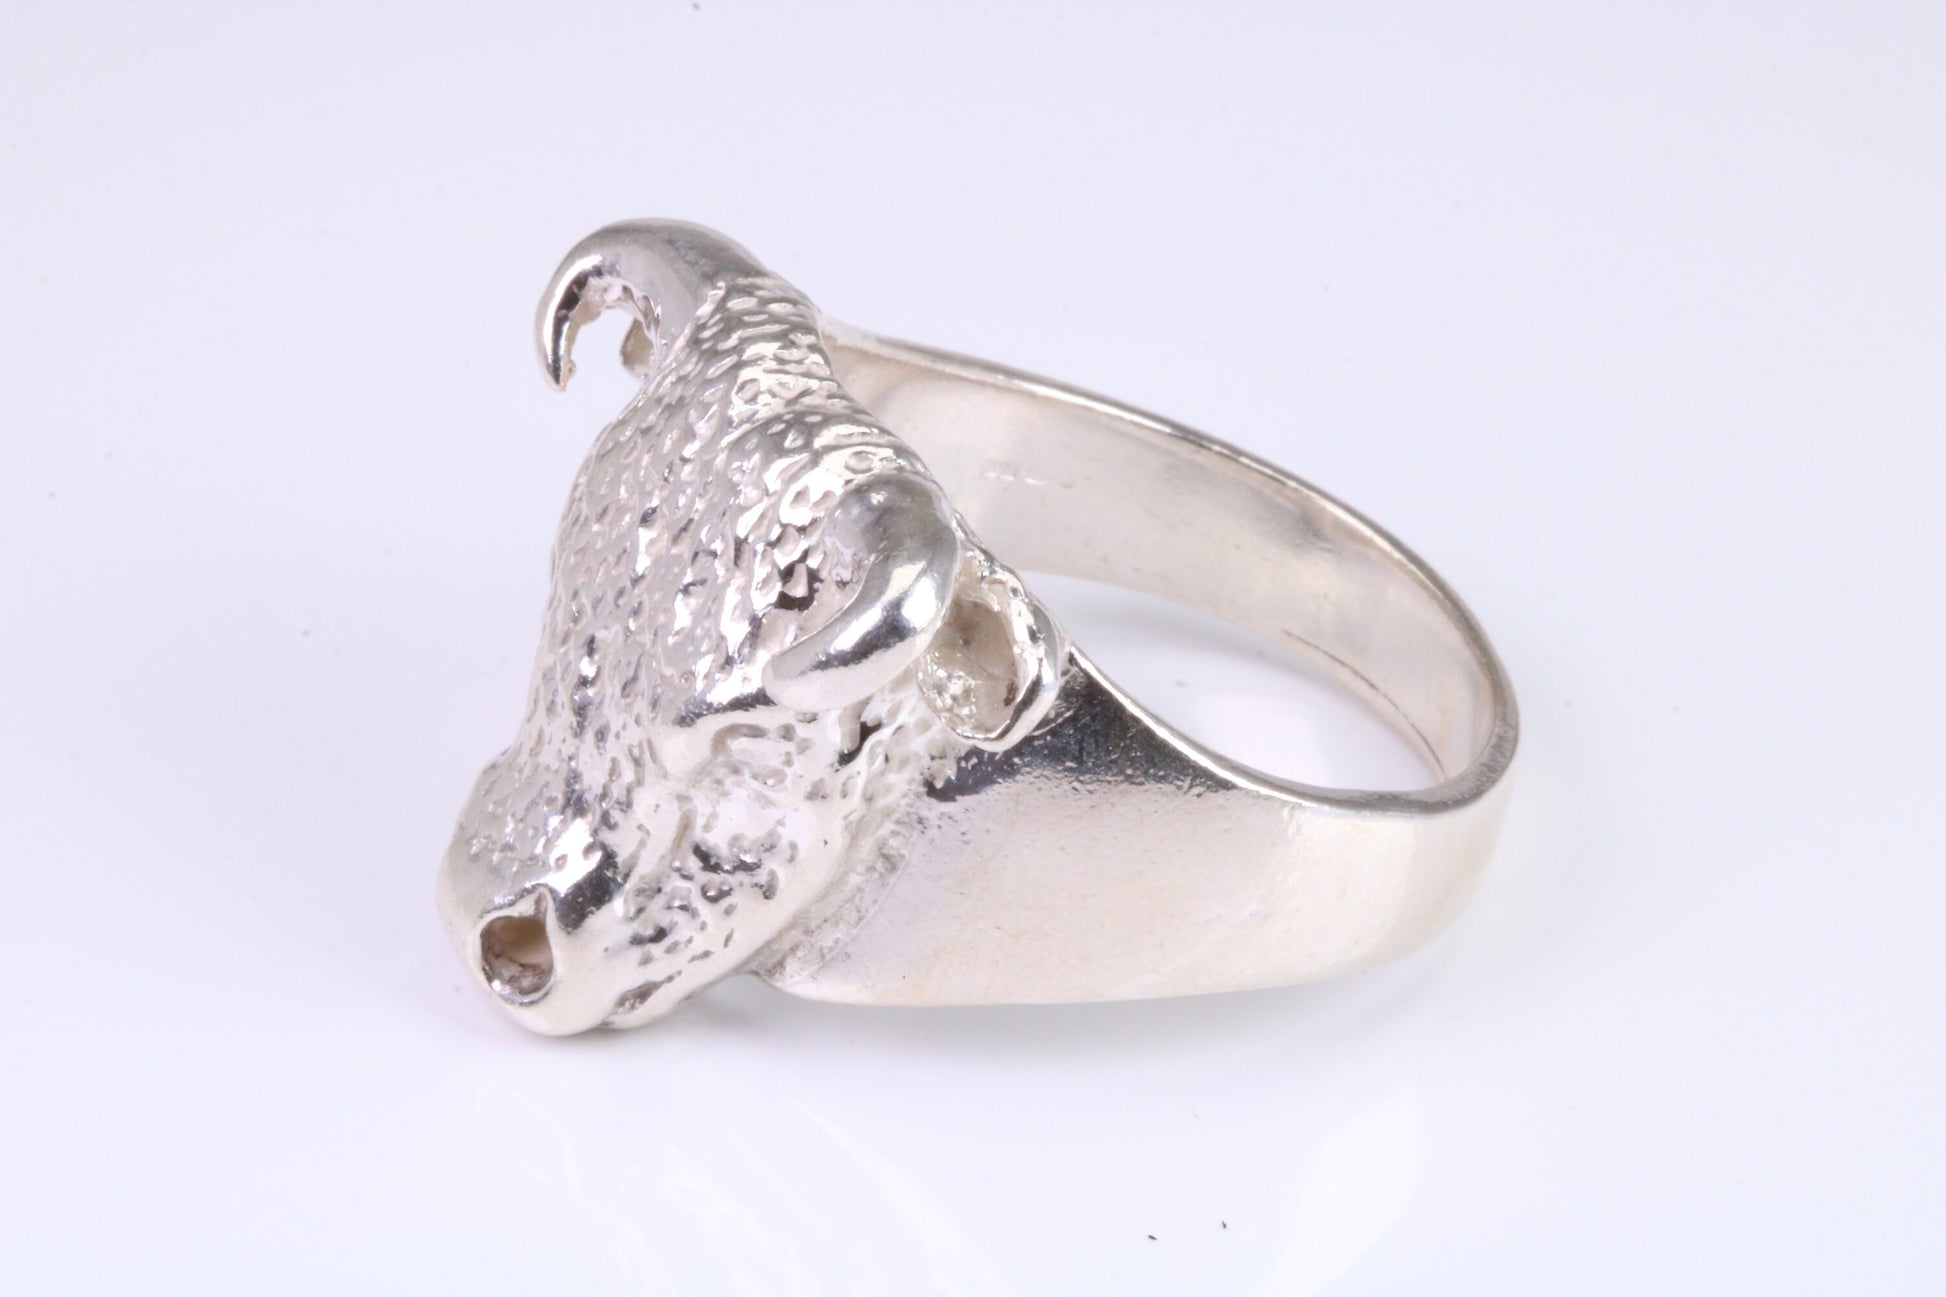 Very large and heavy Bulls head ring,solid silver, perfect for ladies and gents. Available in silver, yellow gold, white gold and platinum